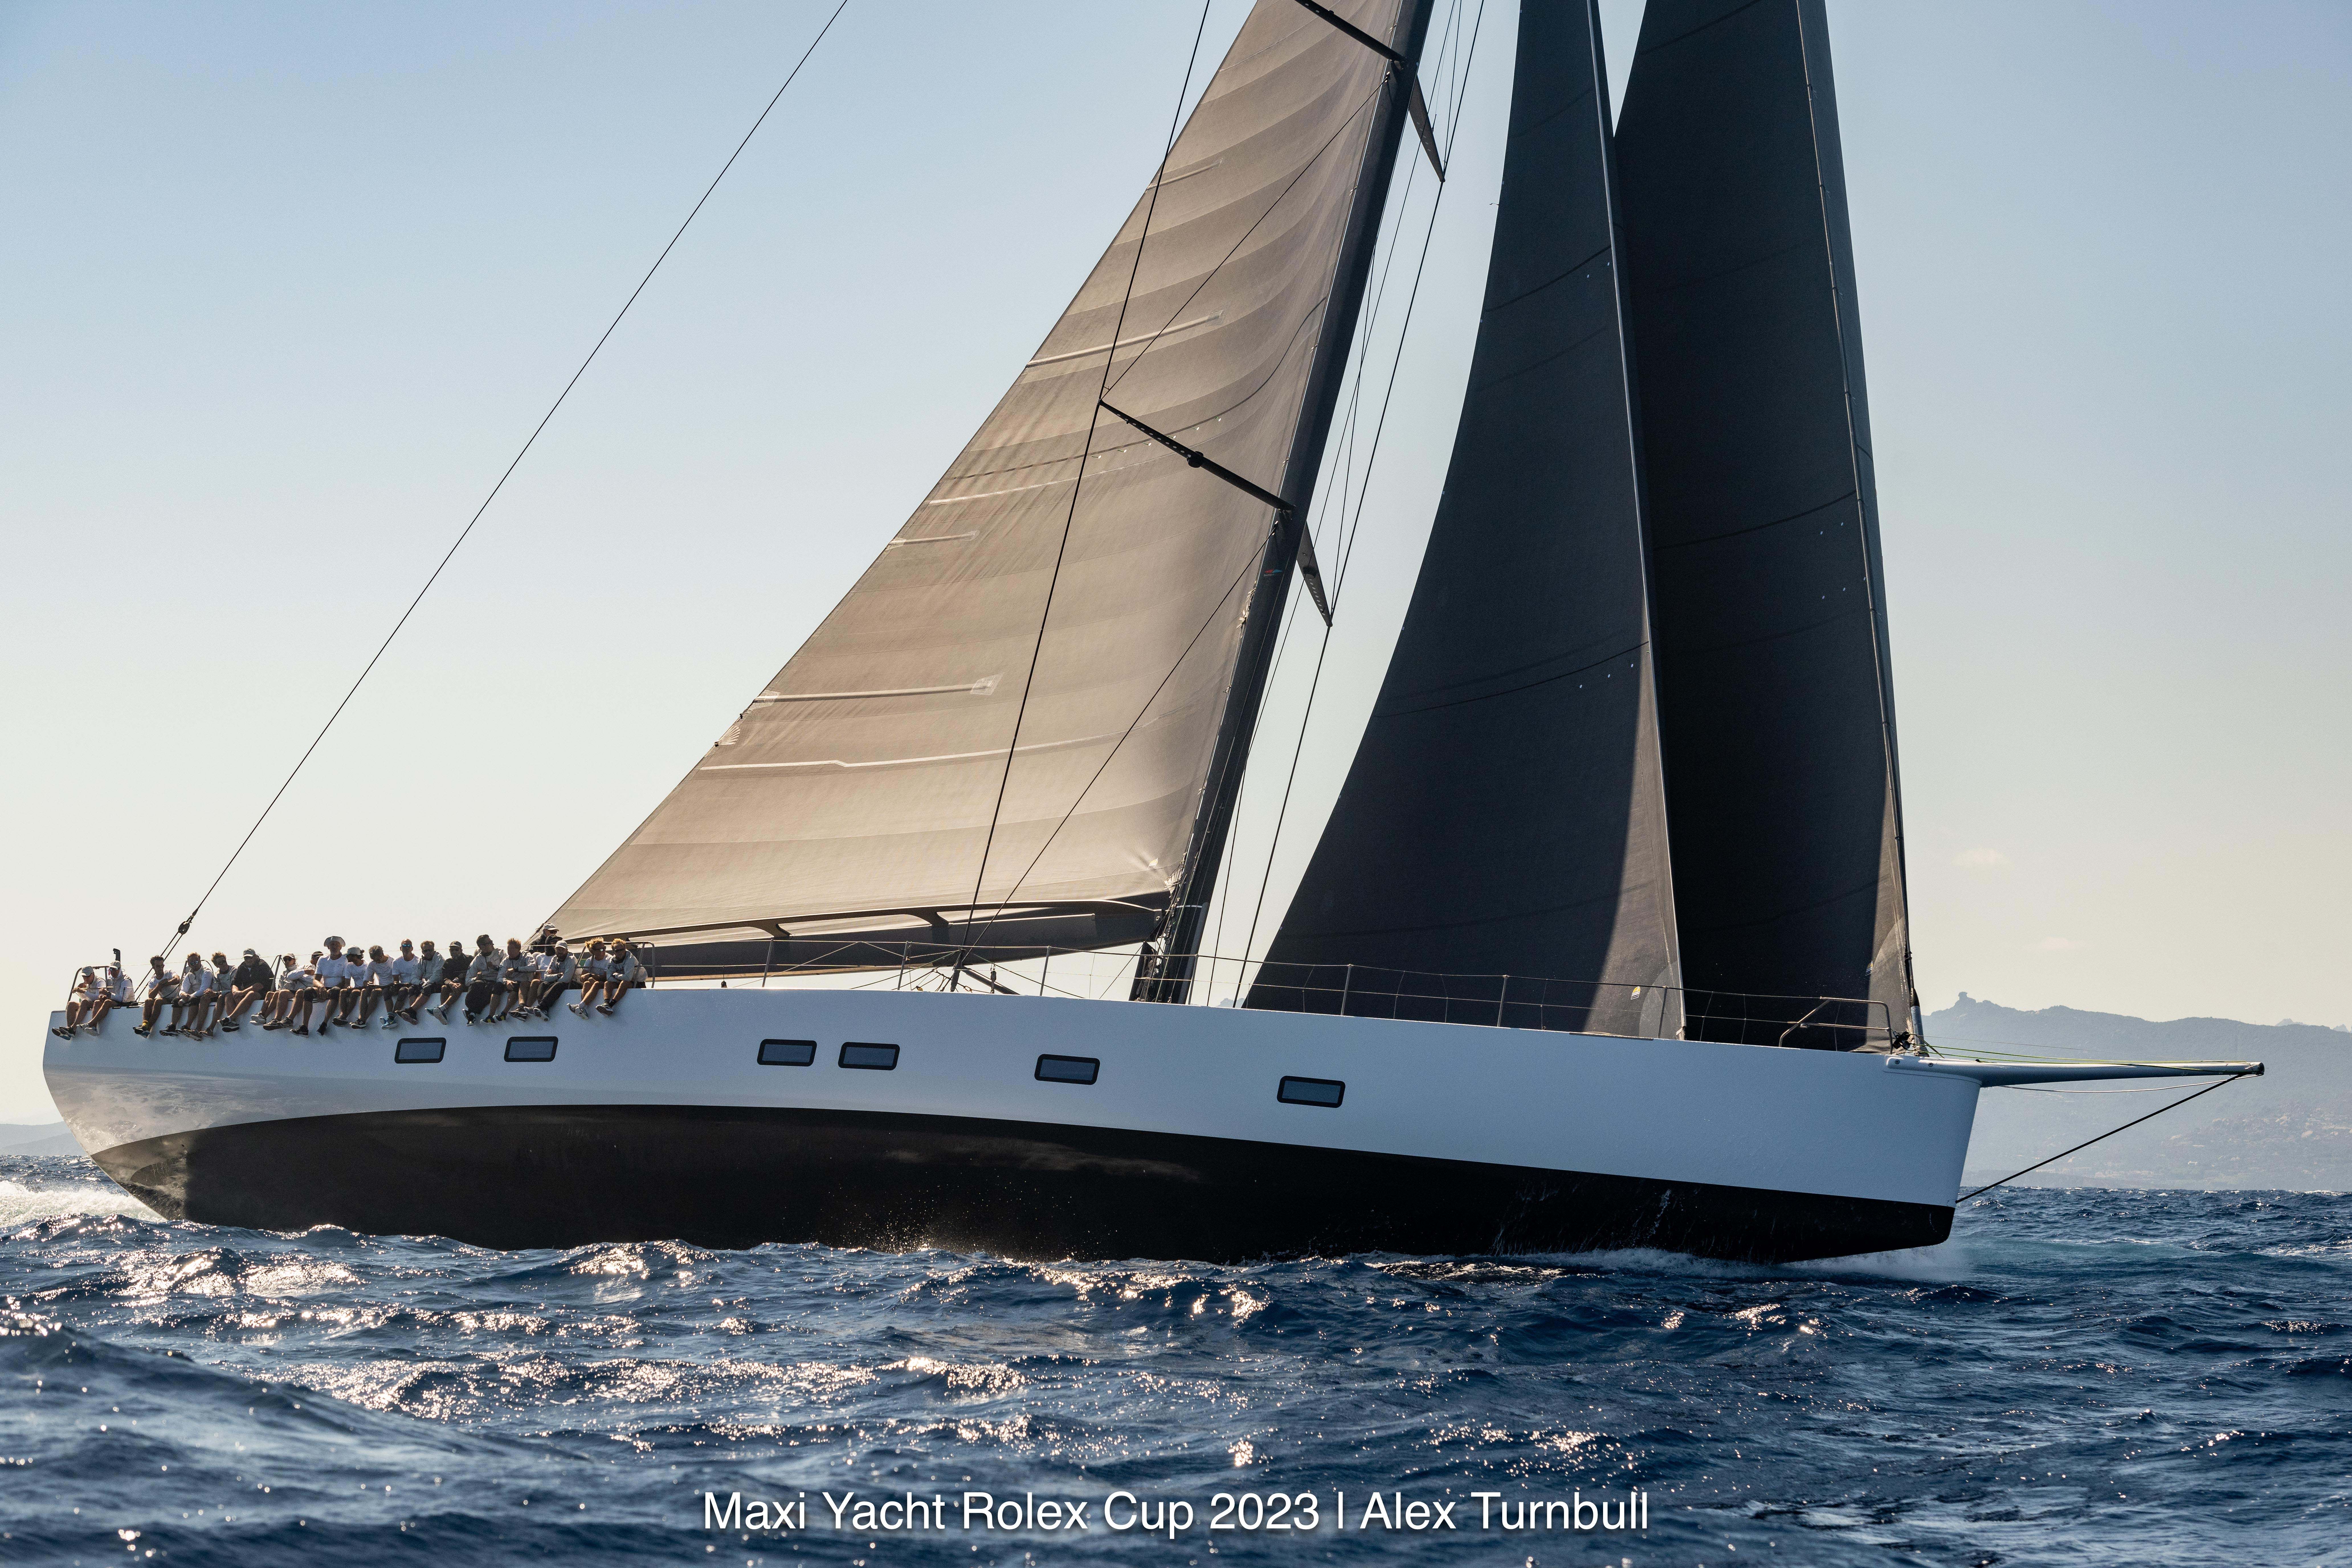 Y3K, the brand new Wally 101 owned by YCCS member Claus-Peter Offen - Maxi Yacht Rolex Cup 2023 © Alex Turnbull